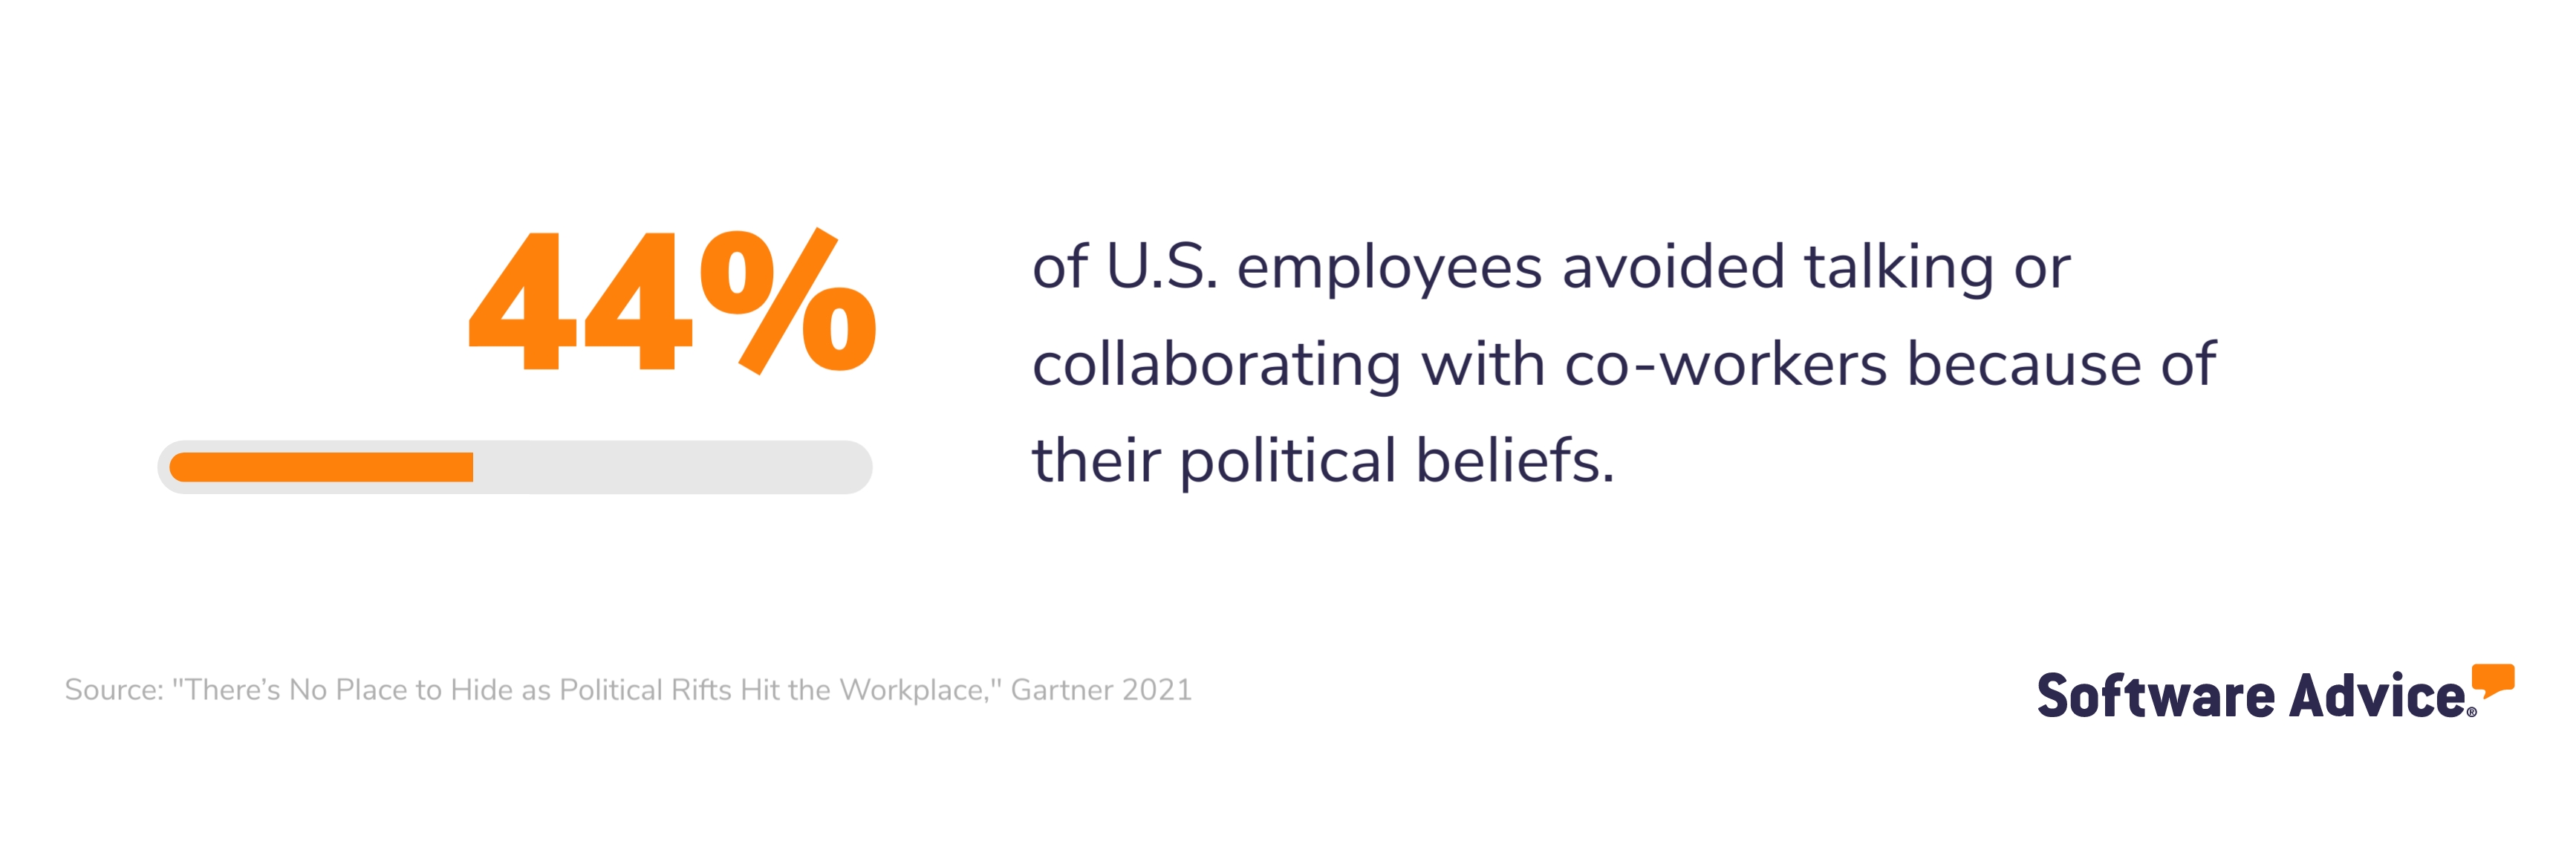 Forty-four percent of U.S. employees avoided talking or collaborating with co-workers because of their political beliefs [3]